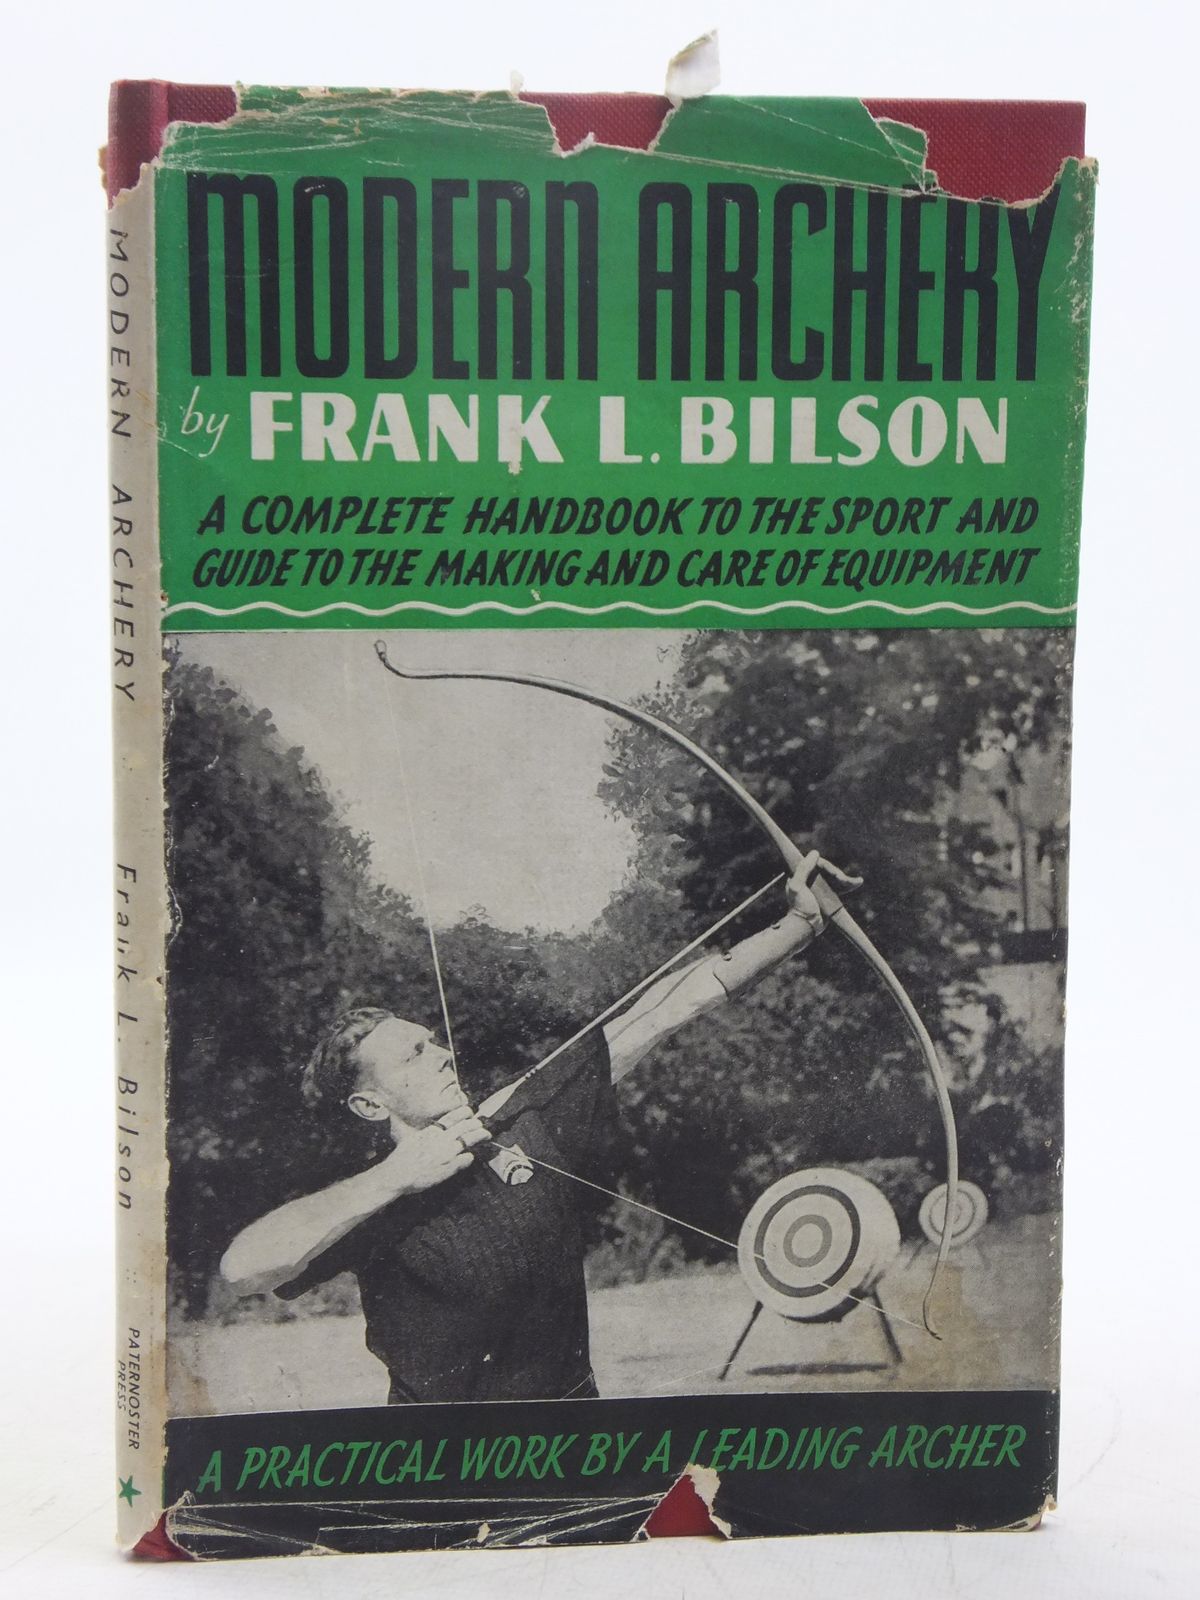 Photo of MODERN ARCHERY written by Bilson, Frank L. published by The Paternoster Press Ltd. (STOCK CODE: 2118752)  for sale by Stella & Rose's Books